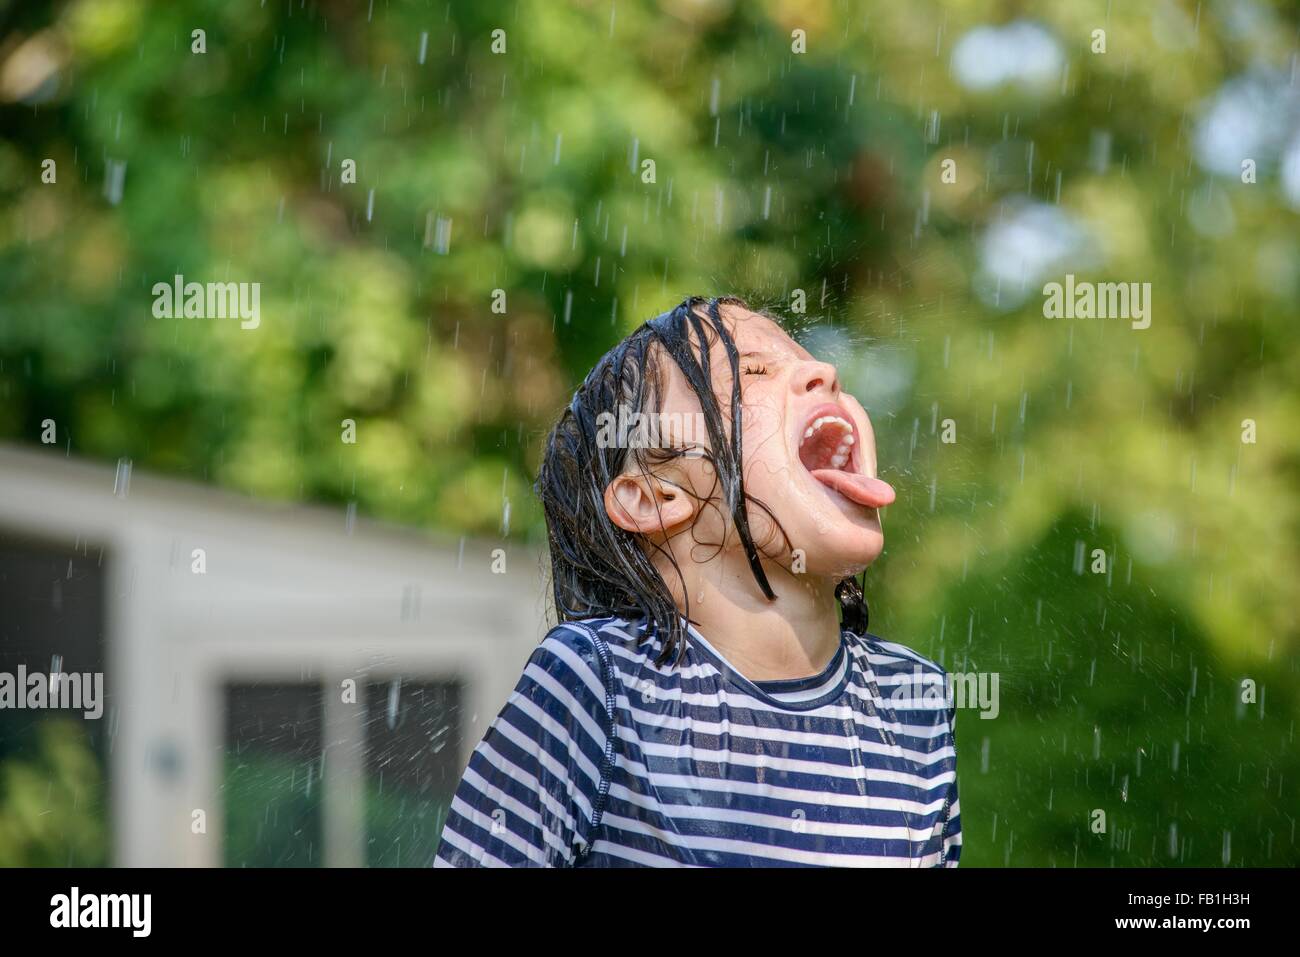 Young girl in garden, catching falling water in mouth Stock Photo